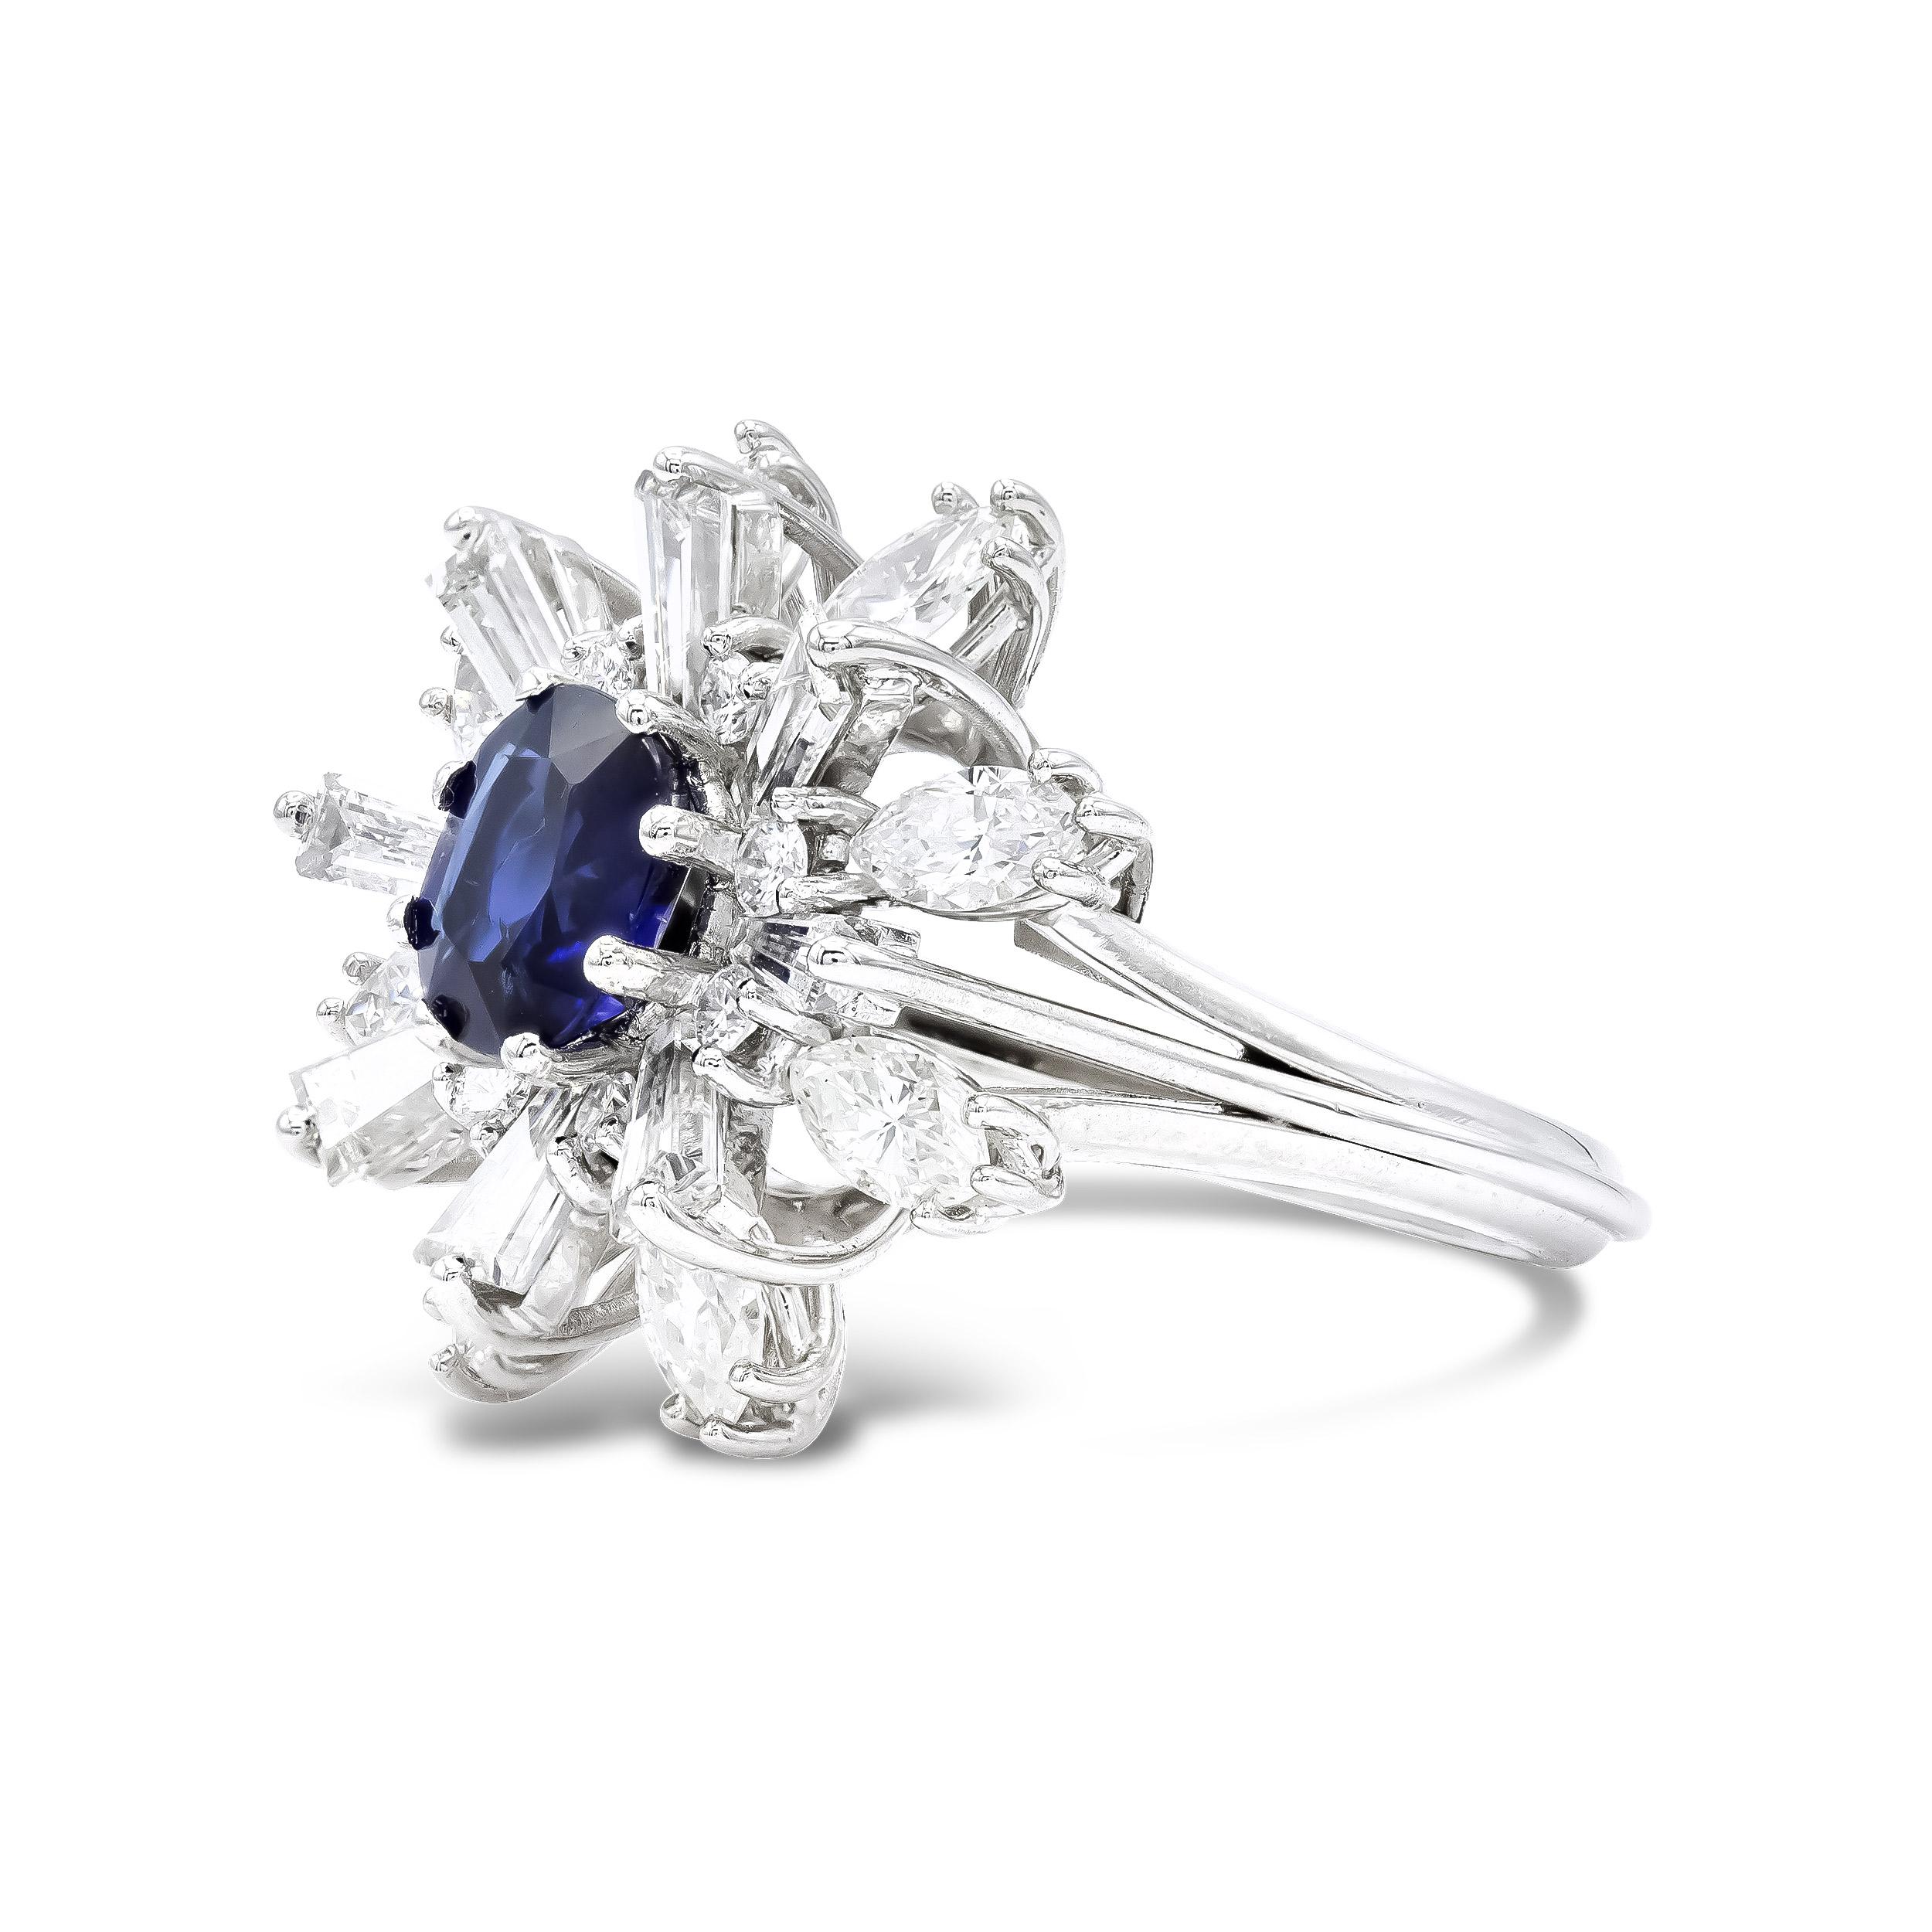 A super bold engagement ring or an outstanding cocktail ring. Either way, this piece is all glamour and would be a stunning addition to any woman's jewelry box. This vintage 'ballerina' setting is centered by a deep-hued oval cut sapphire set in